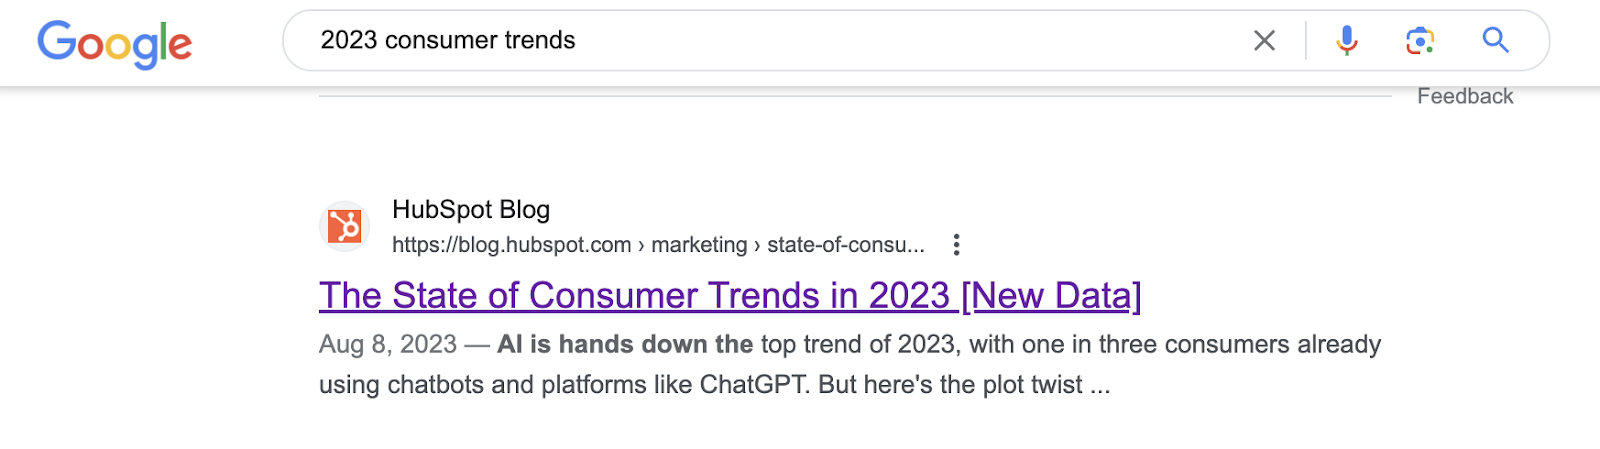 marketing types, HubSpot state of consumer trends appears on Google 